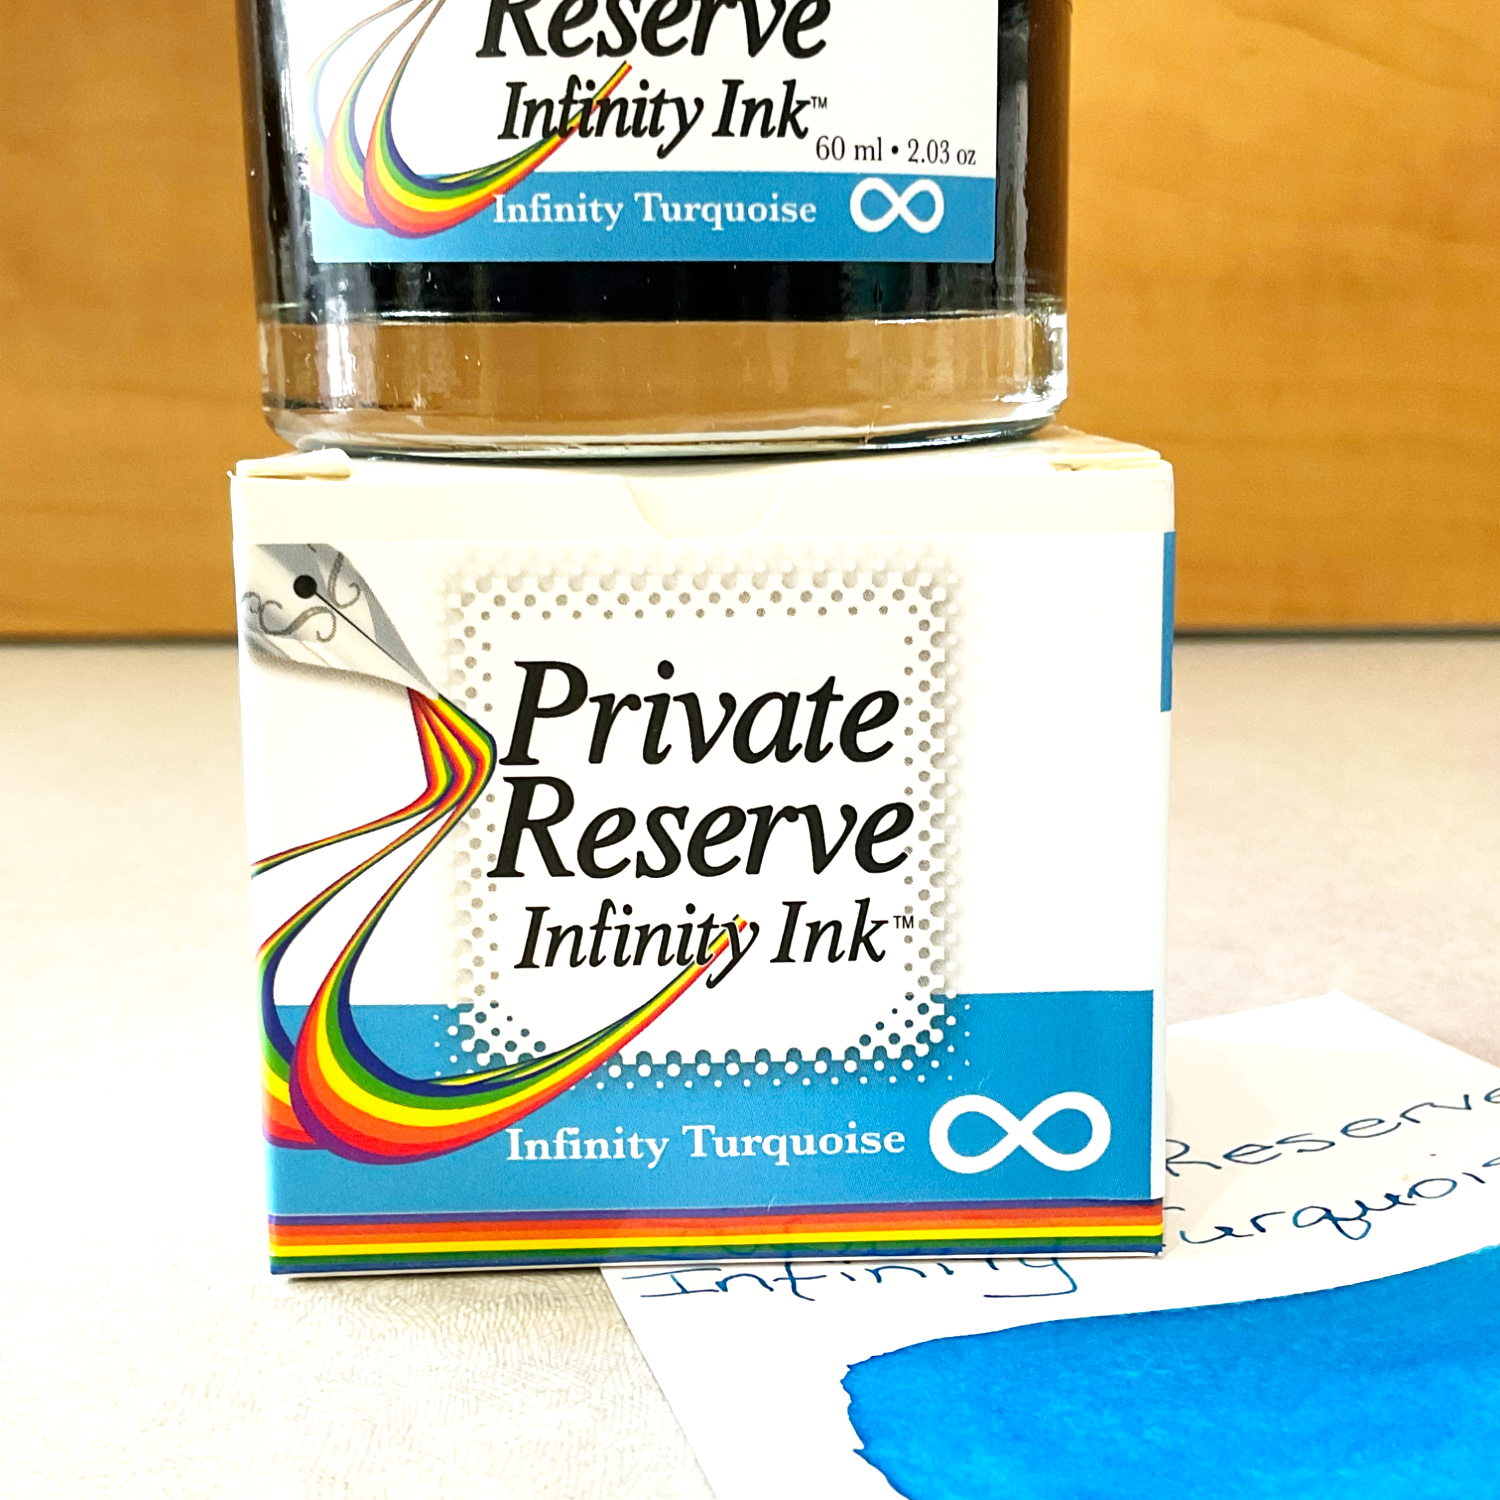 Private Reserve Infinity Ink Bottle